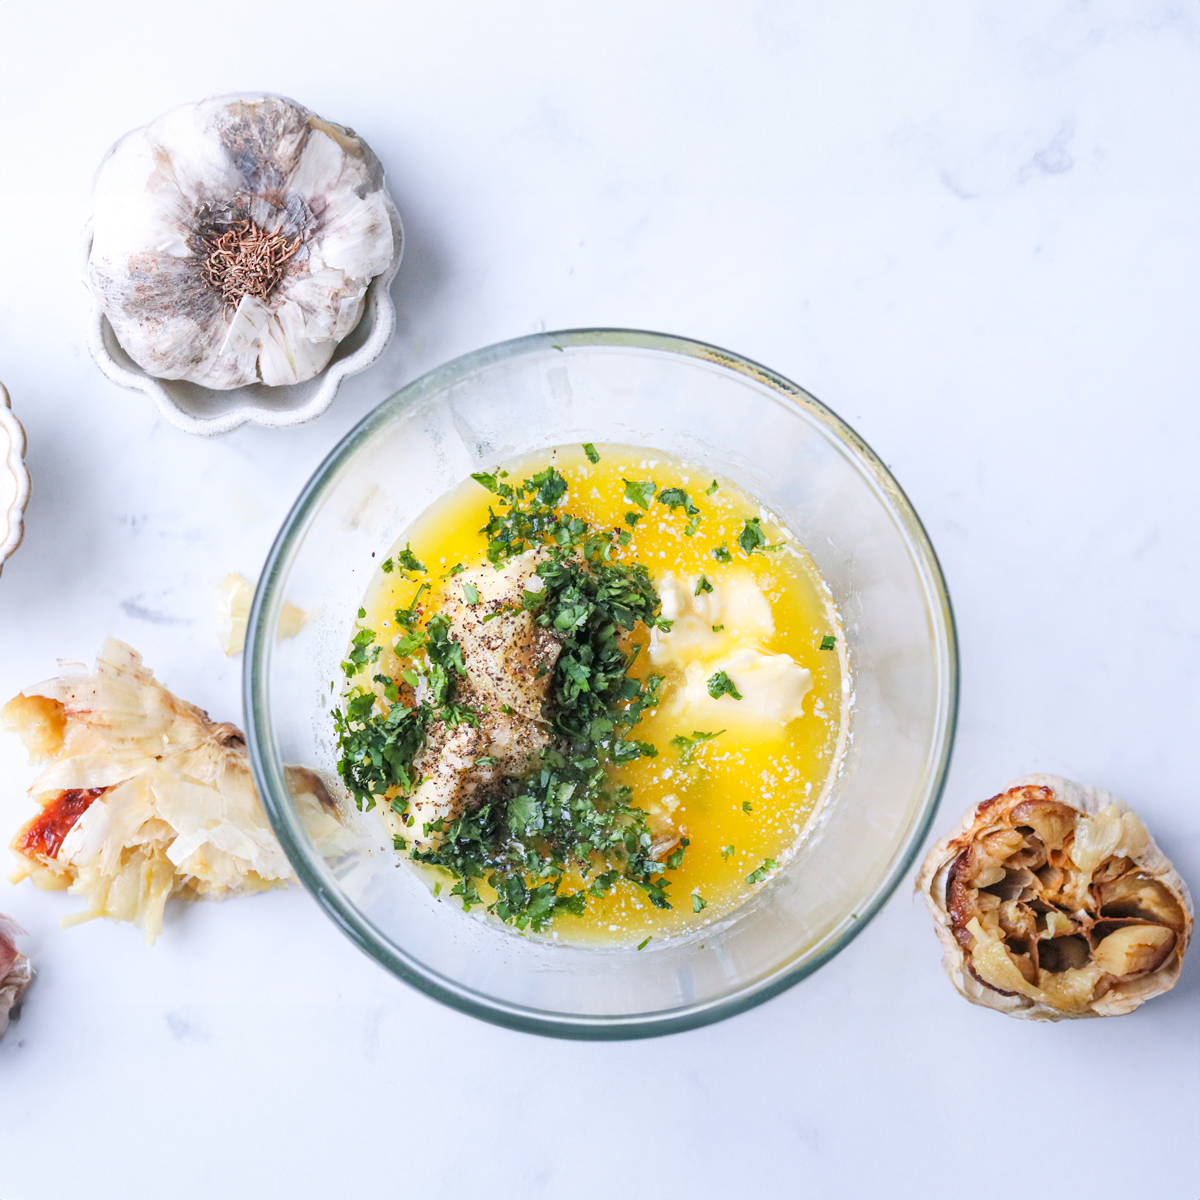 Combine the ingredients to make roasted garlic butter 